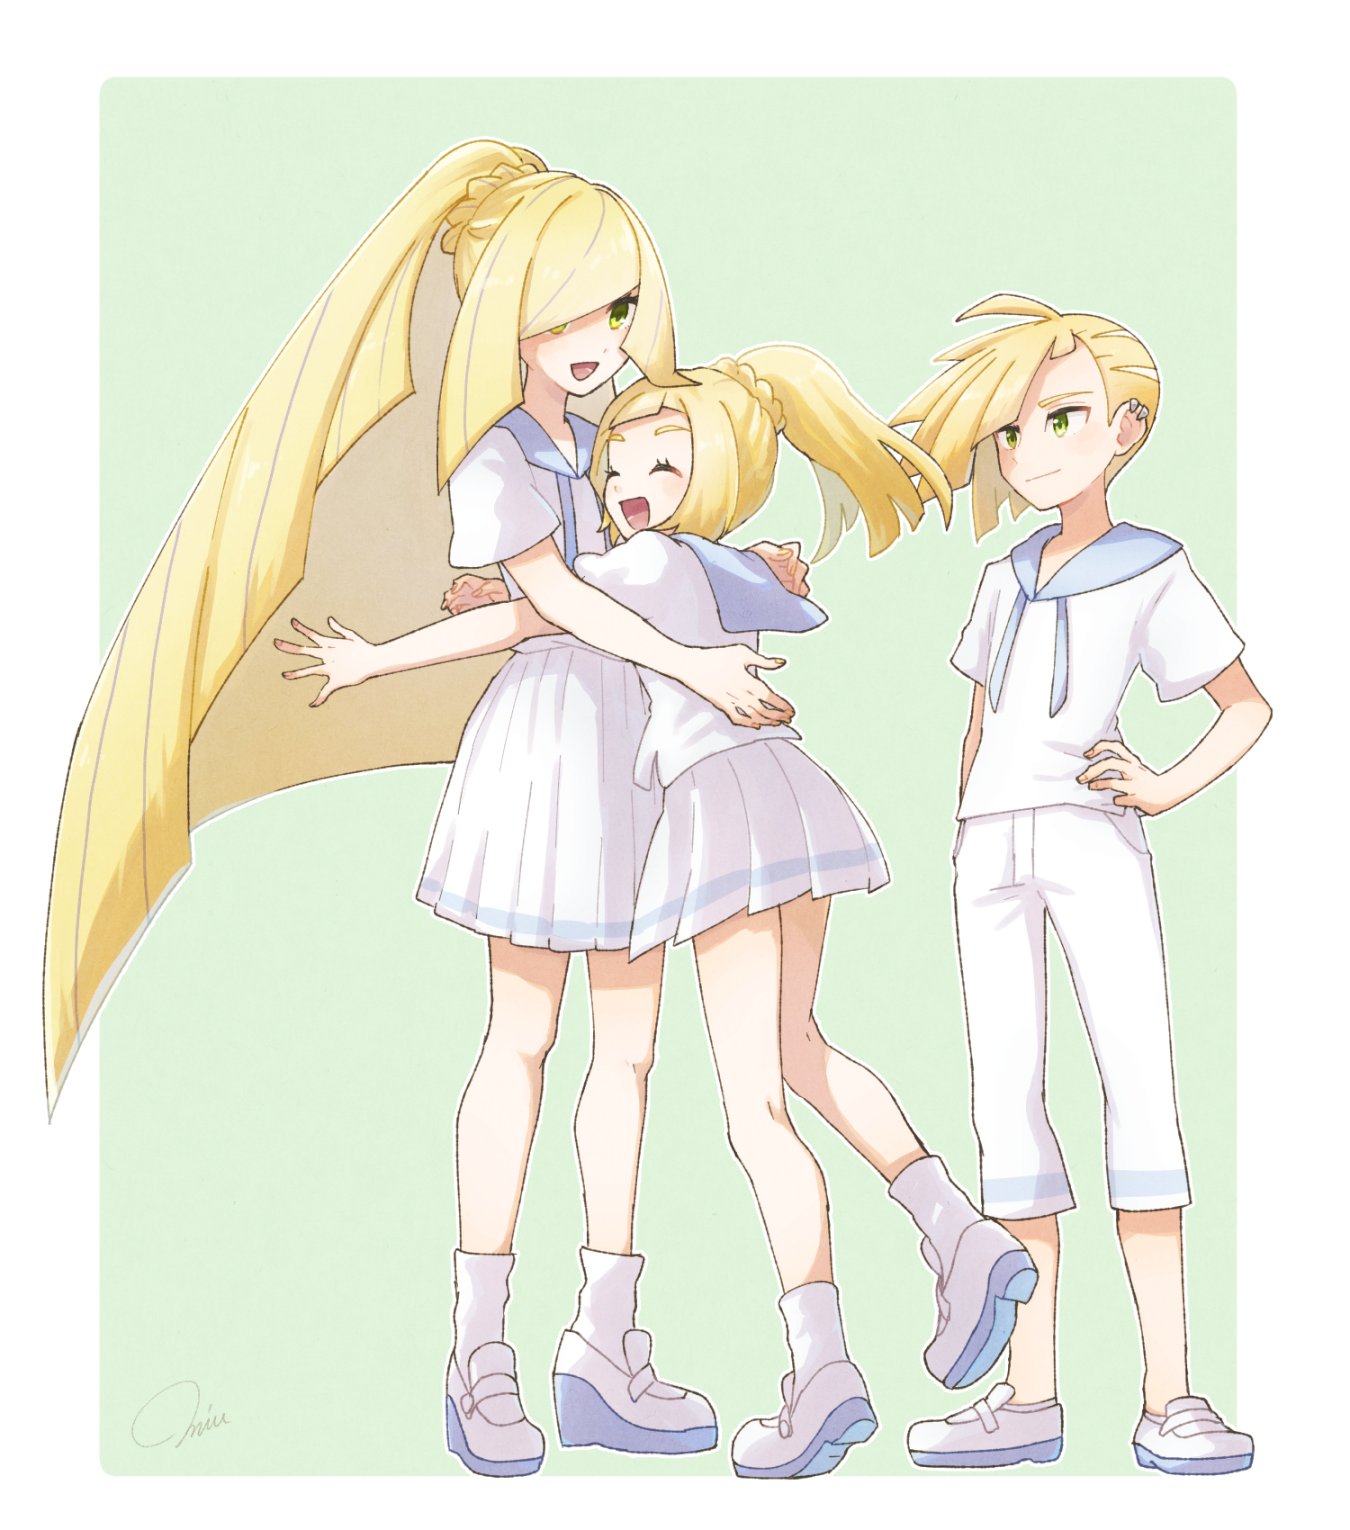 1boy 2girls blonde_hair brother_and_sister capri_pants closed_eyes cosplay gladio_(pokemon) green_eyes hair_over_one_eye hand_on_hip highres hug lillie_(pokemon) lillie_(pokemon)_(cosplay) long_hair lusamine_(pokemon) miu_(miuuu_721) mother_and_daughter mother_and_son multiple_girls open_mouth pants pokemon pokemon_(game) pokemon_sm shirt short_hair short_sleeves siblings skirt socks white_footwear white_legwear white_pants white_shirt white_skirt